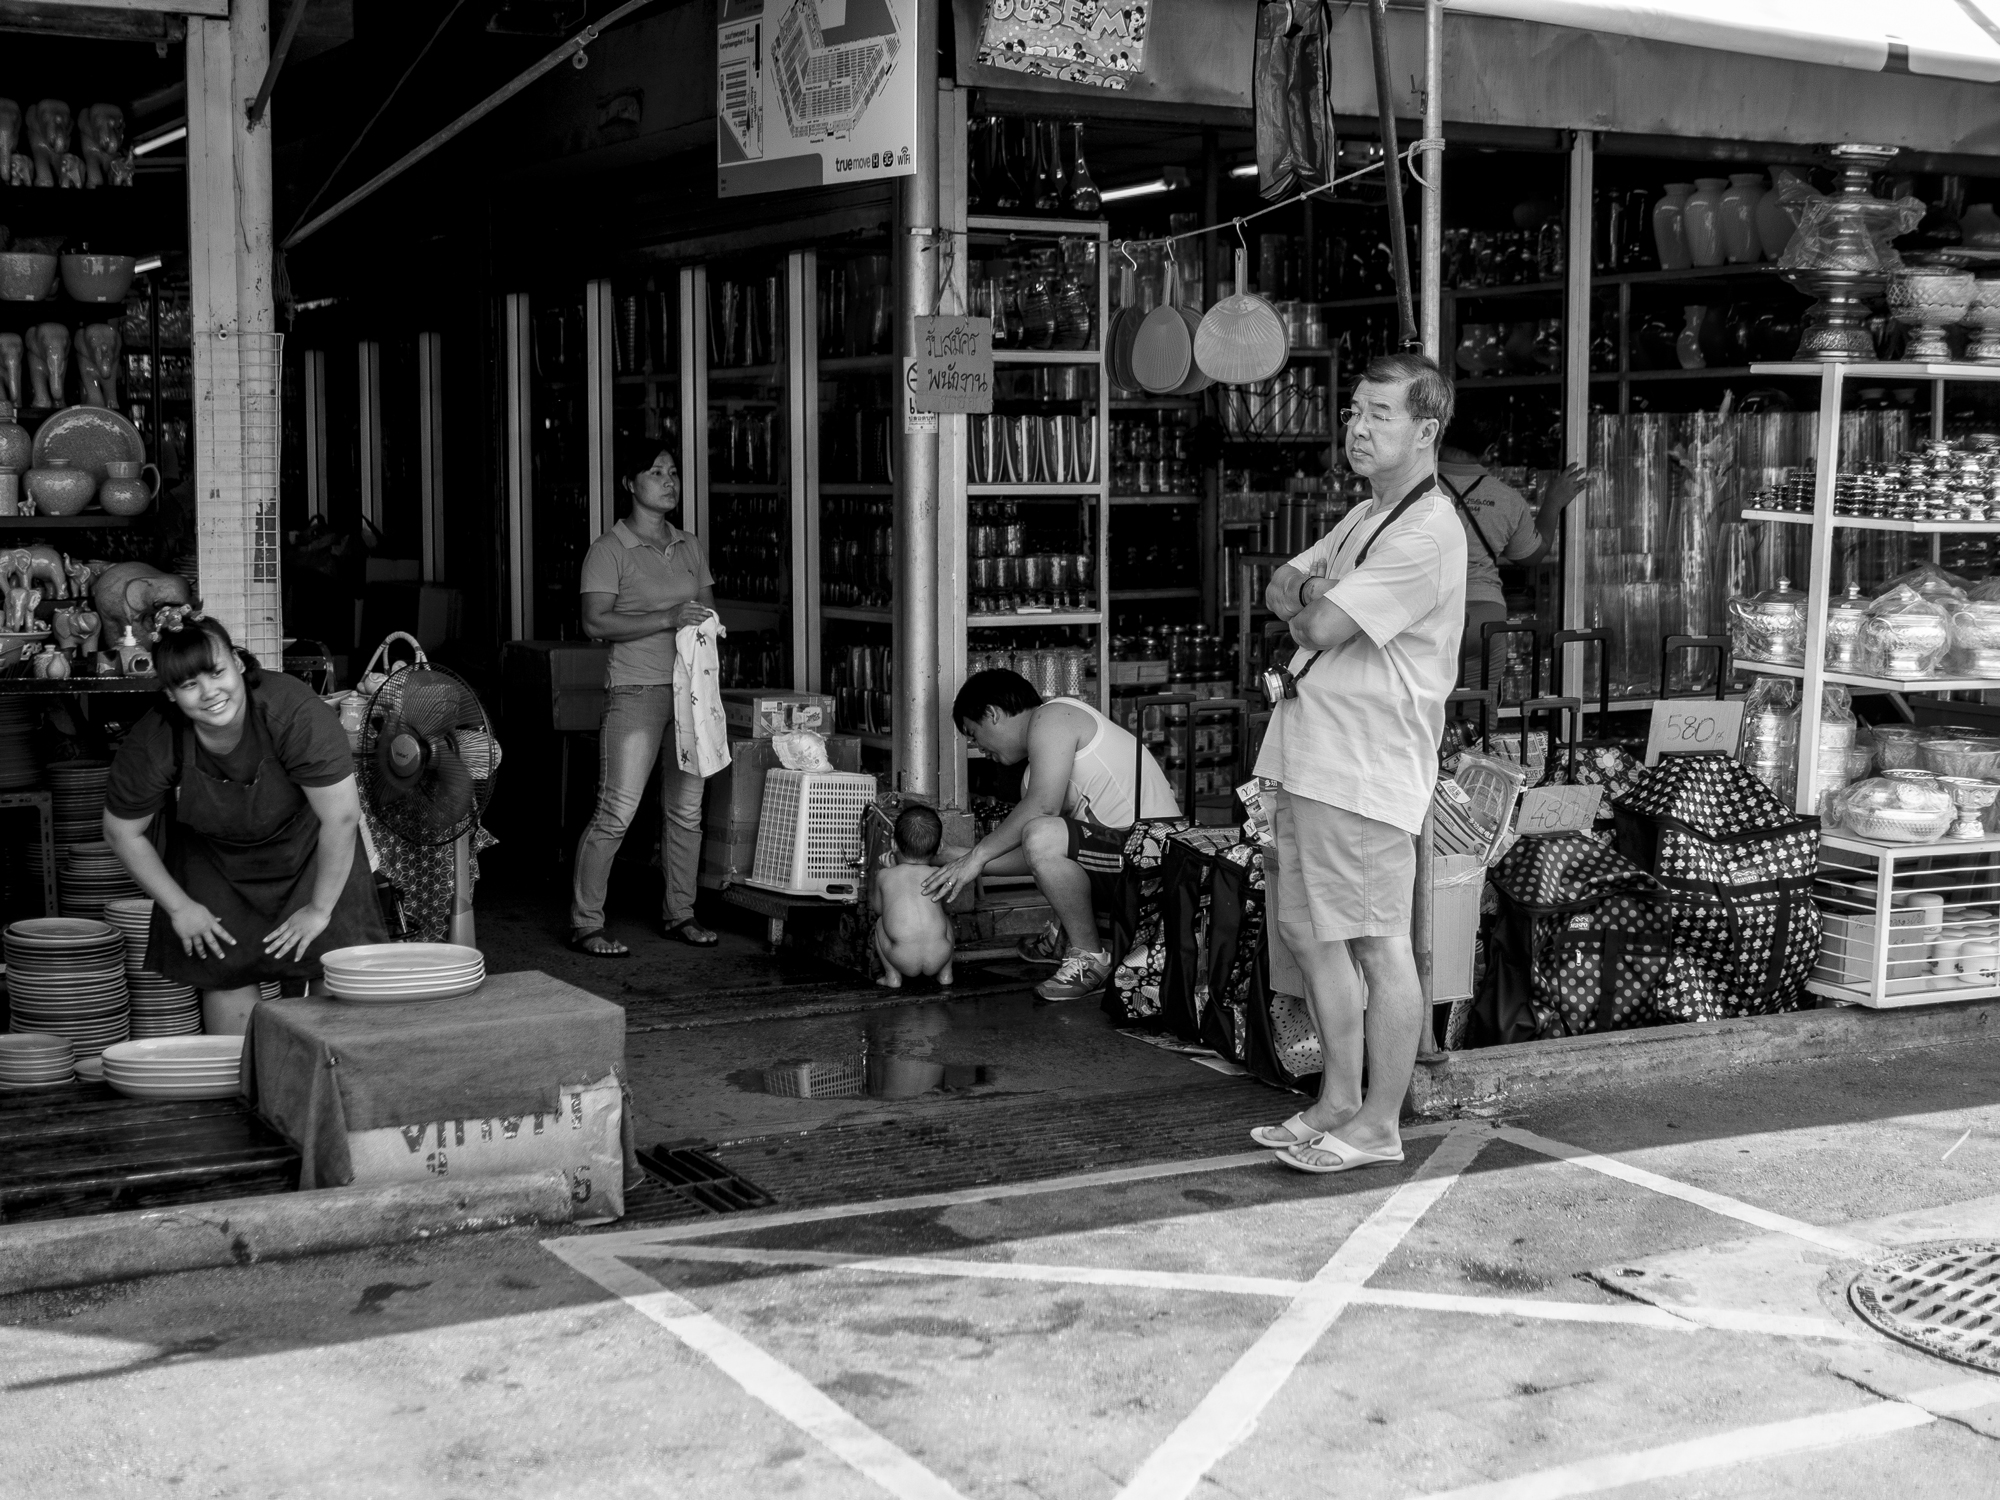 people in the market stand waiting for customers